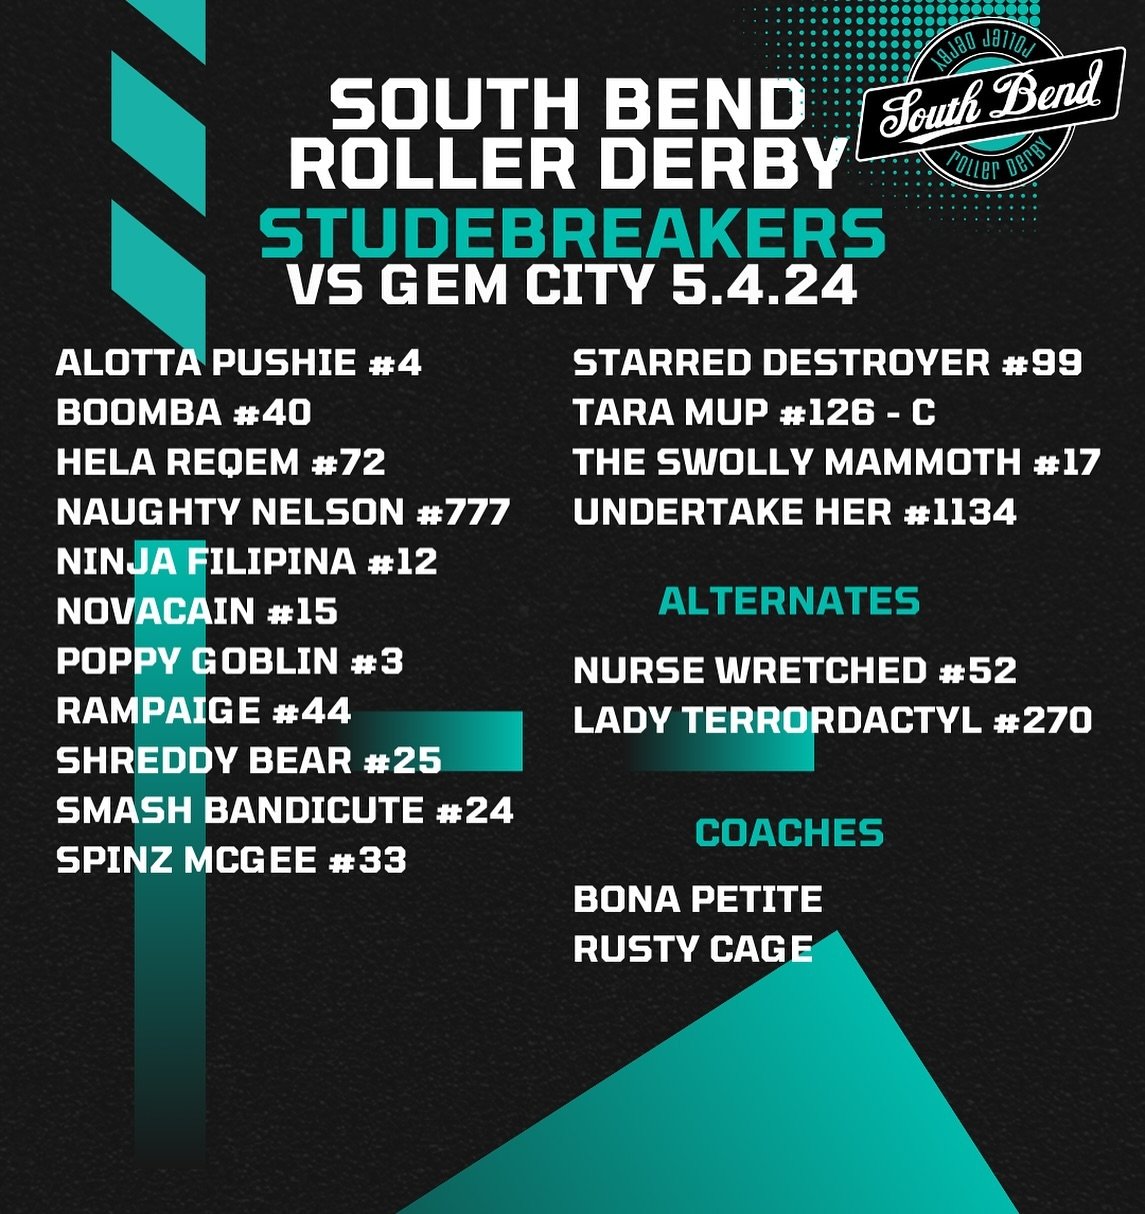 SBRD is hitting the road next weekend - as we travel to Dayton, OH to take on @gemcityrollerderby!